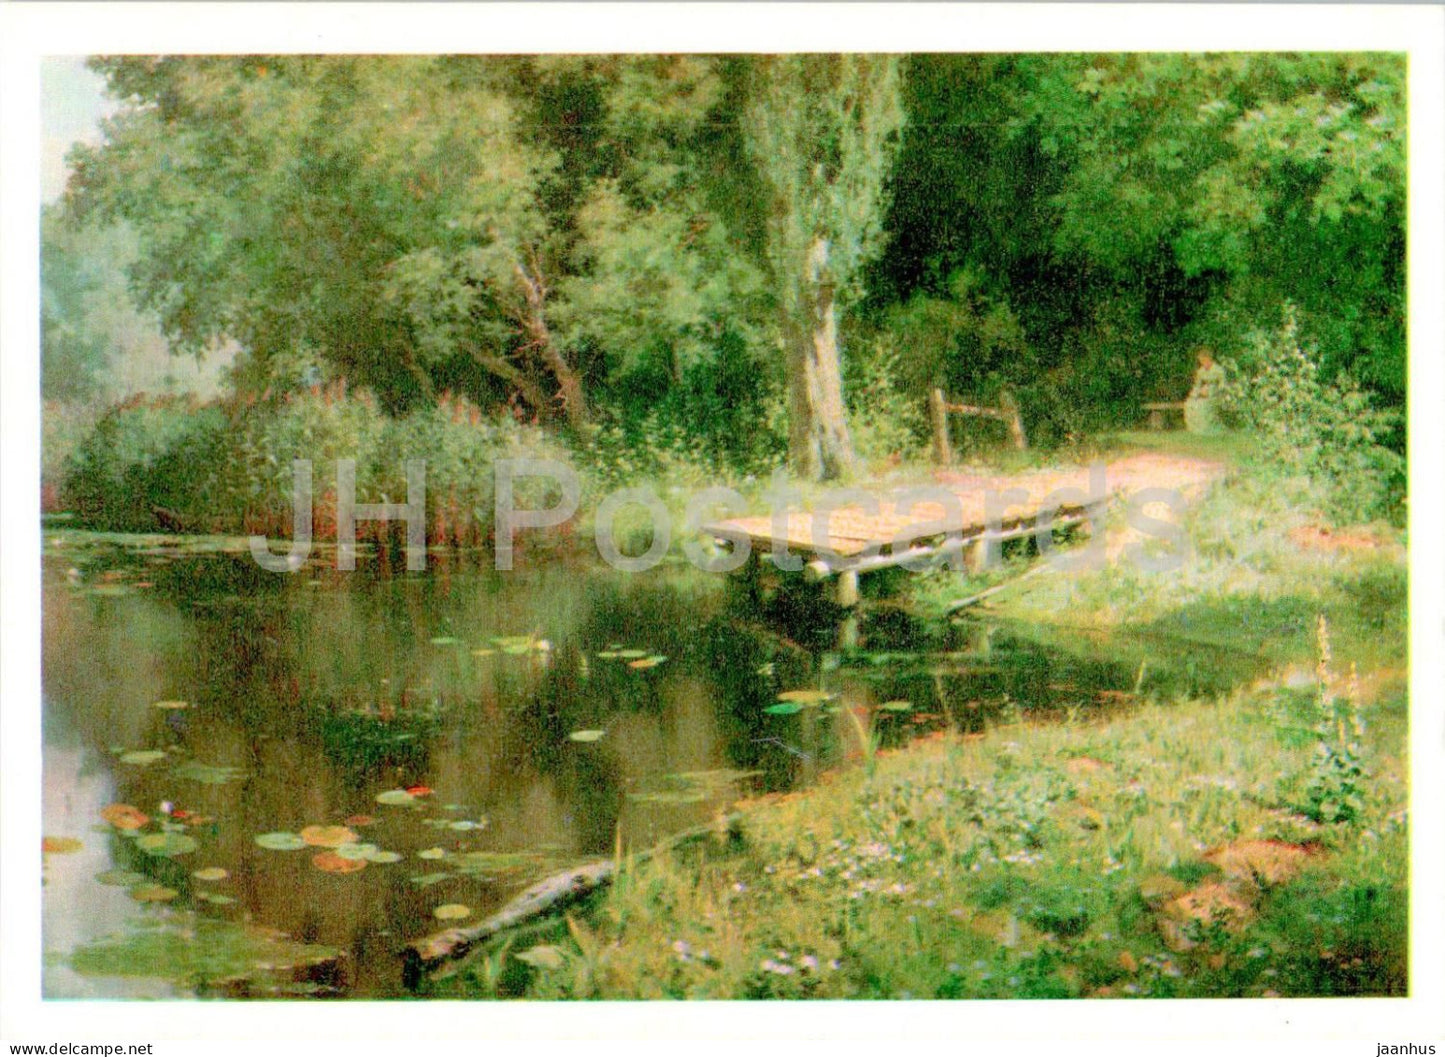 painting by V. Polenov - Overgrown pond - Russian art - 1974 - Russia USSR - unused - JH Postcards